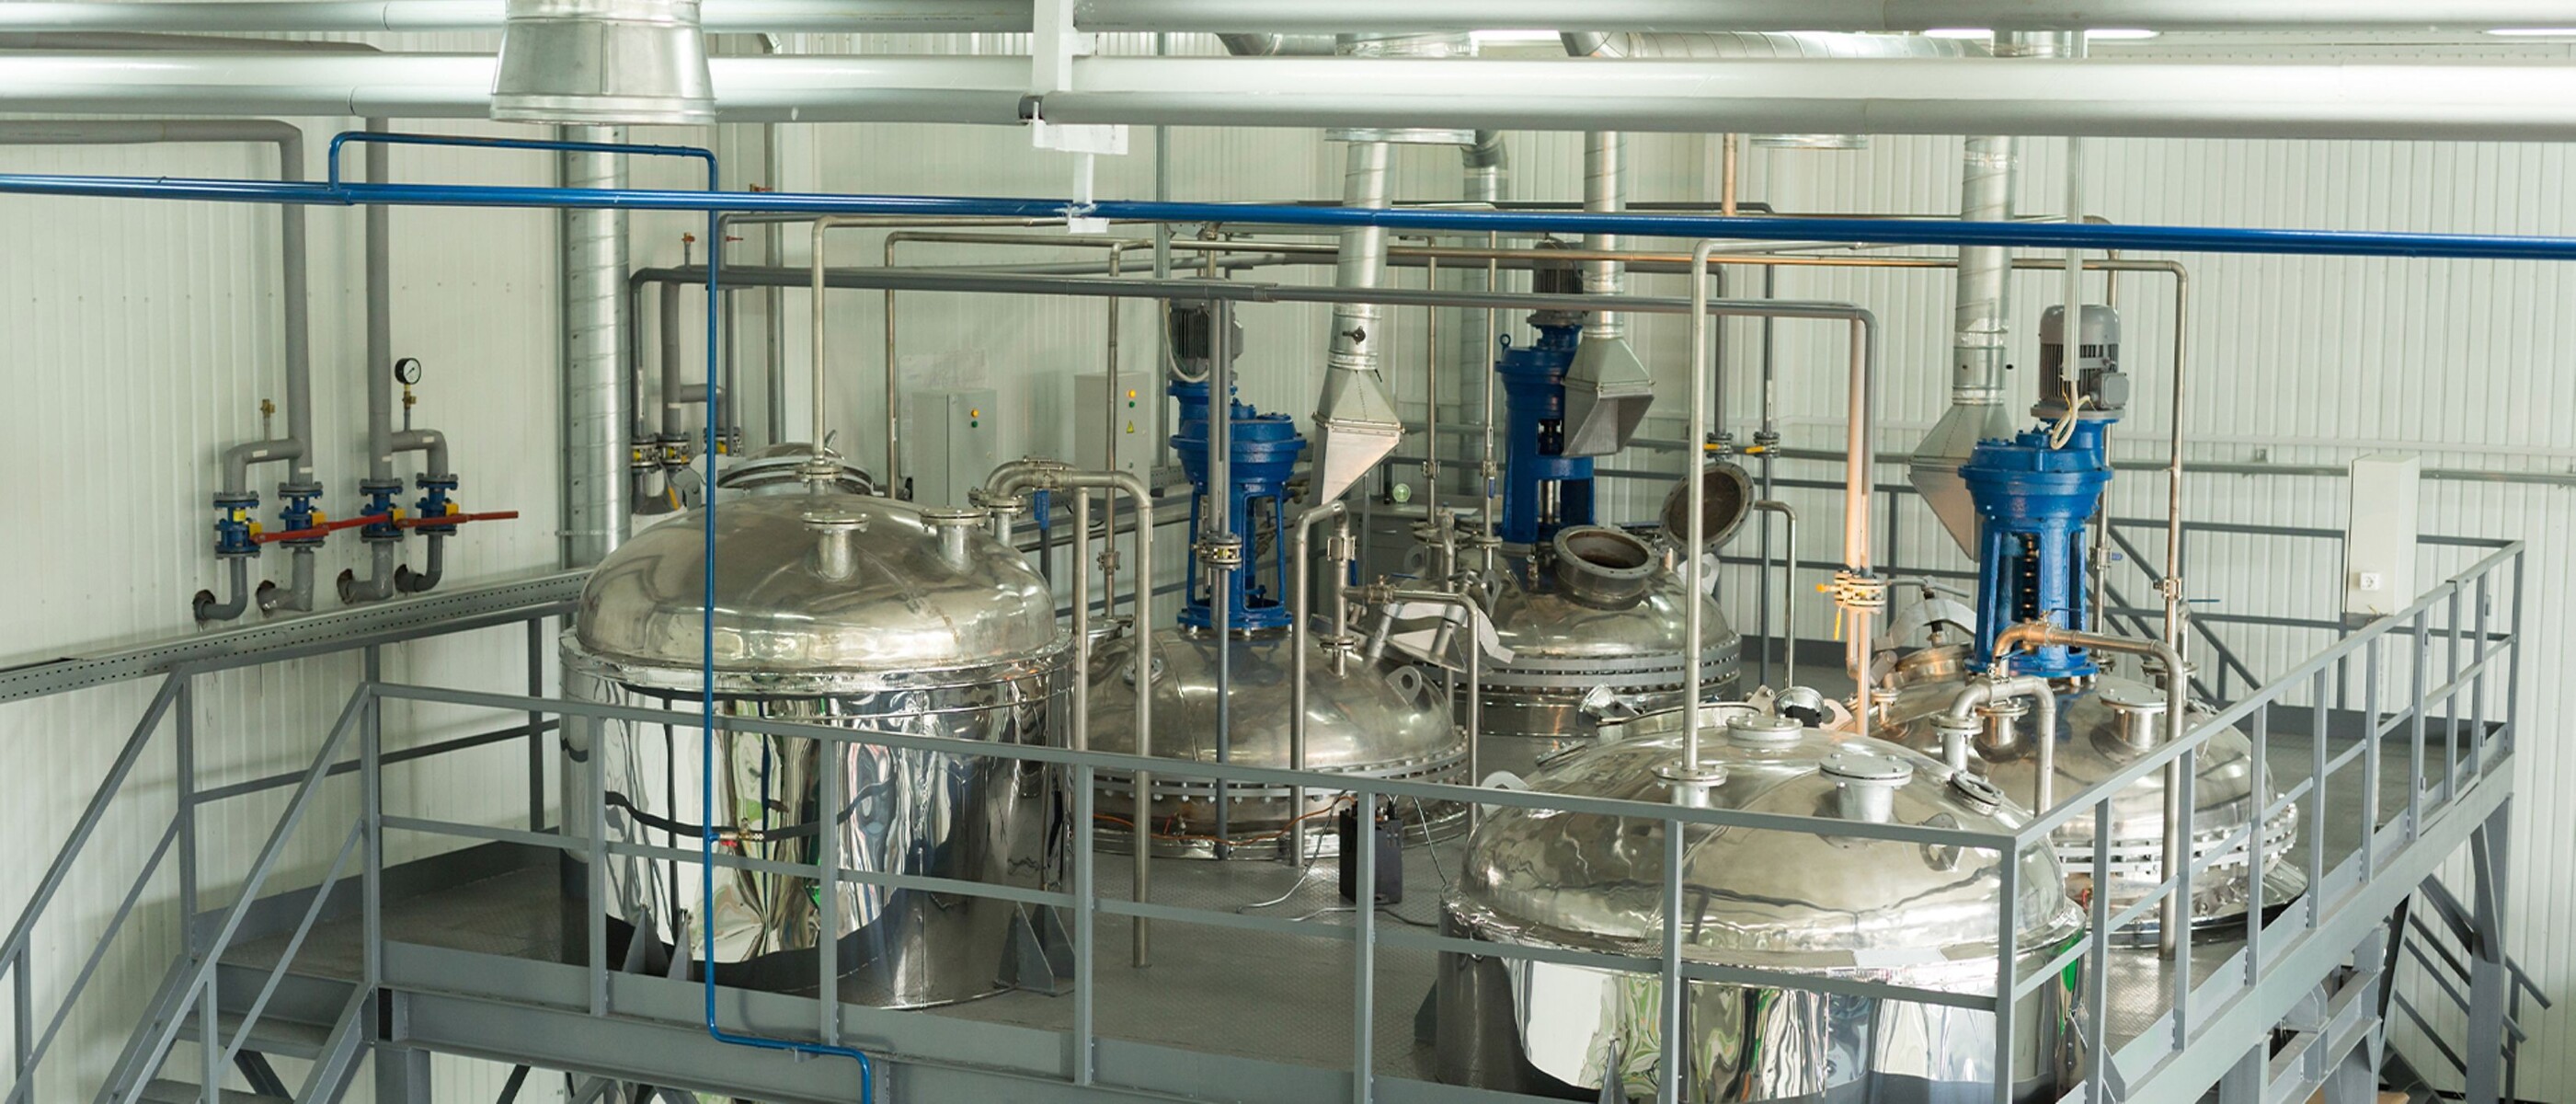 Large storage vats inside a speciality chemicals production plant